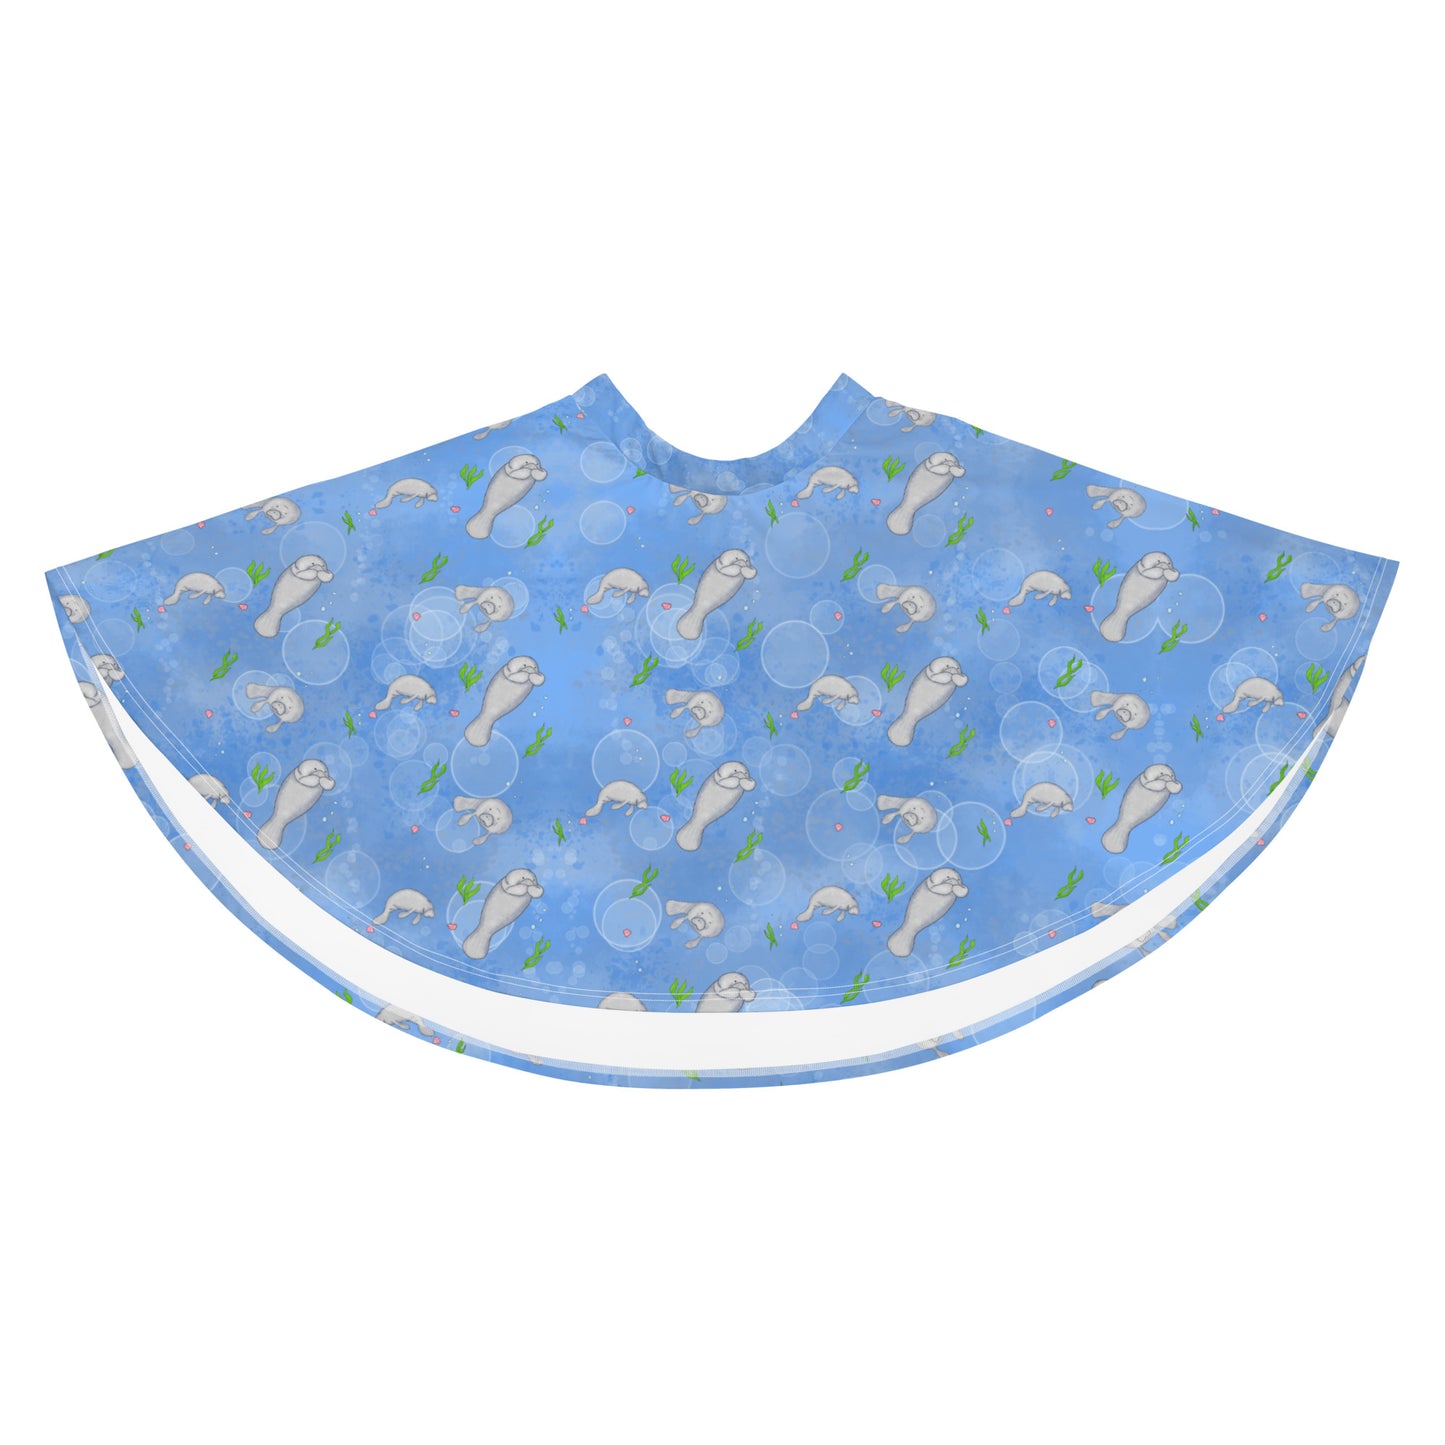 Manatee patterned skater skirt with elastic waist and mid-thigh length skirt. Has a pattern of manatees, seashells, seaweed and bubbles on a blue background. Flat lay view.